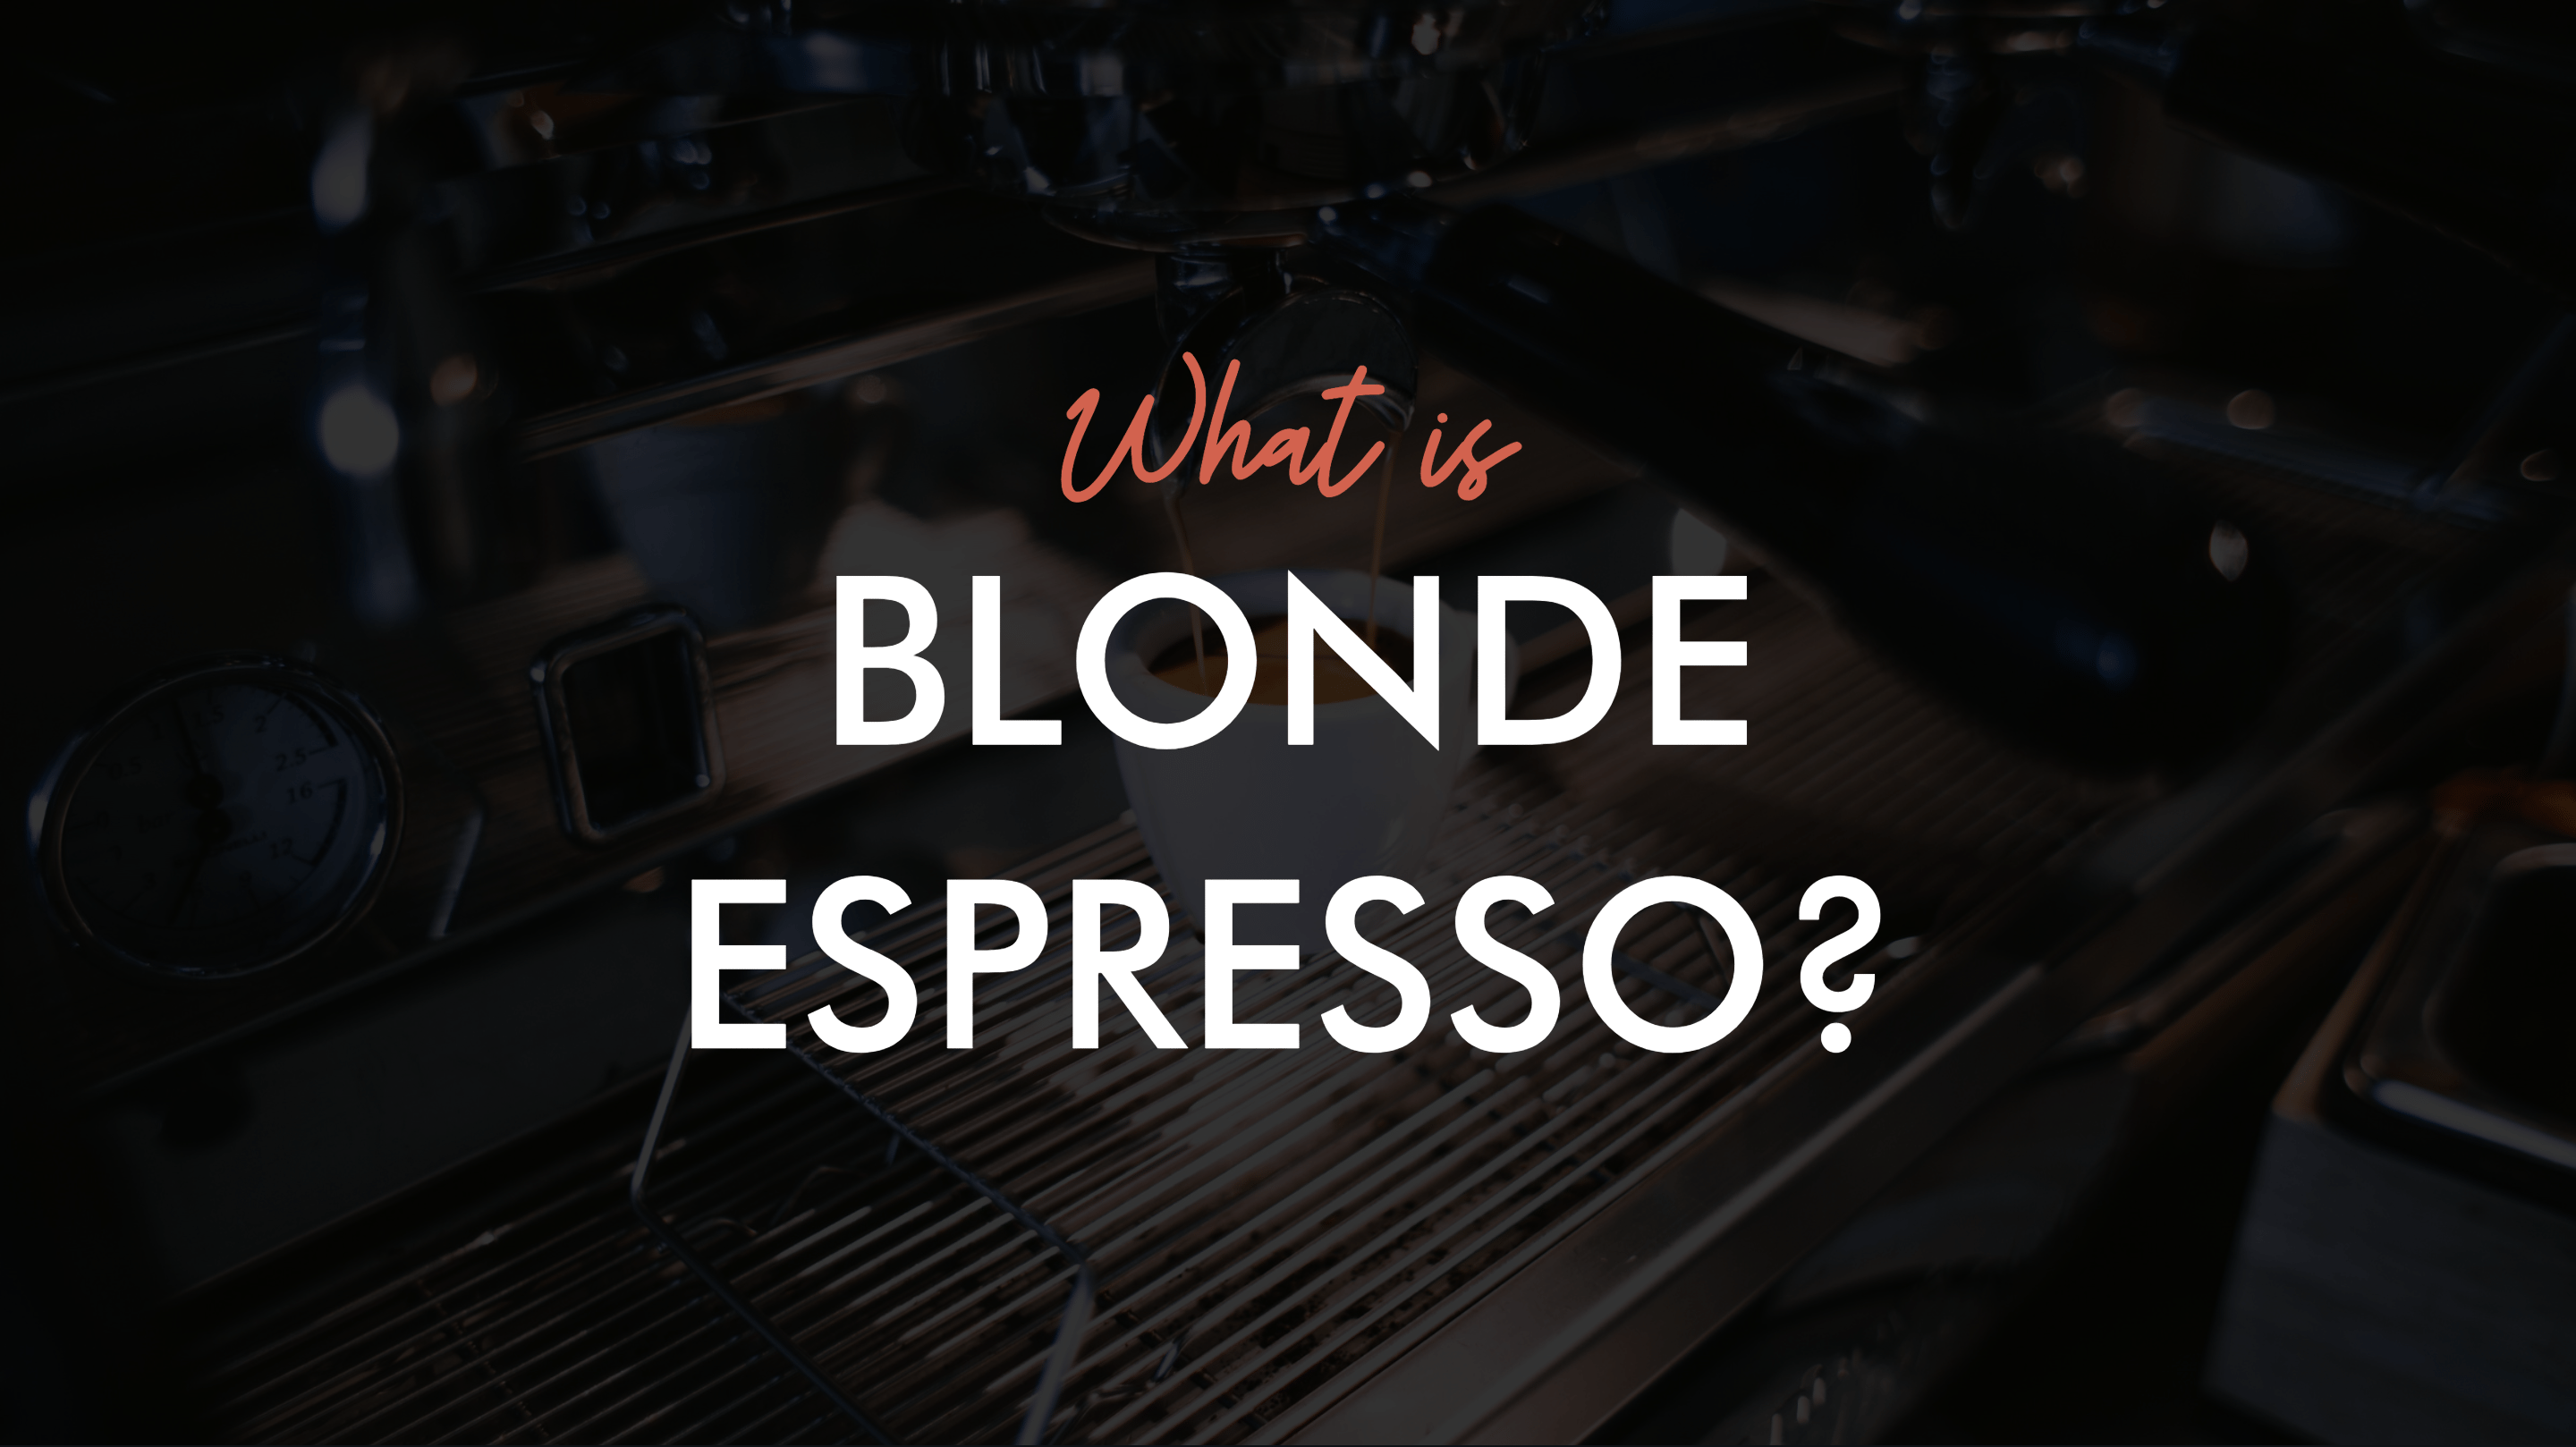 What is a blonde espresso?